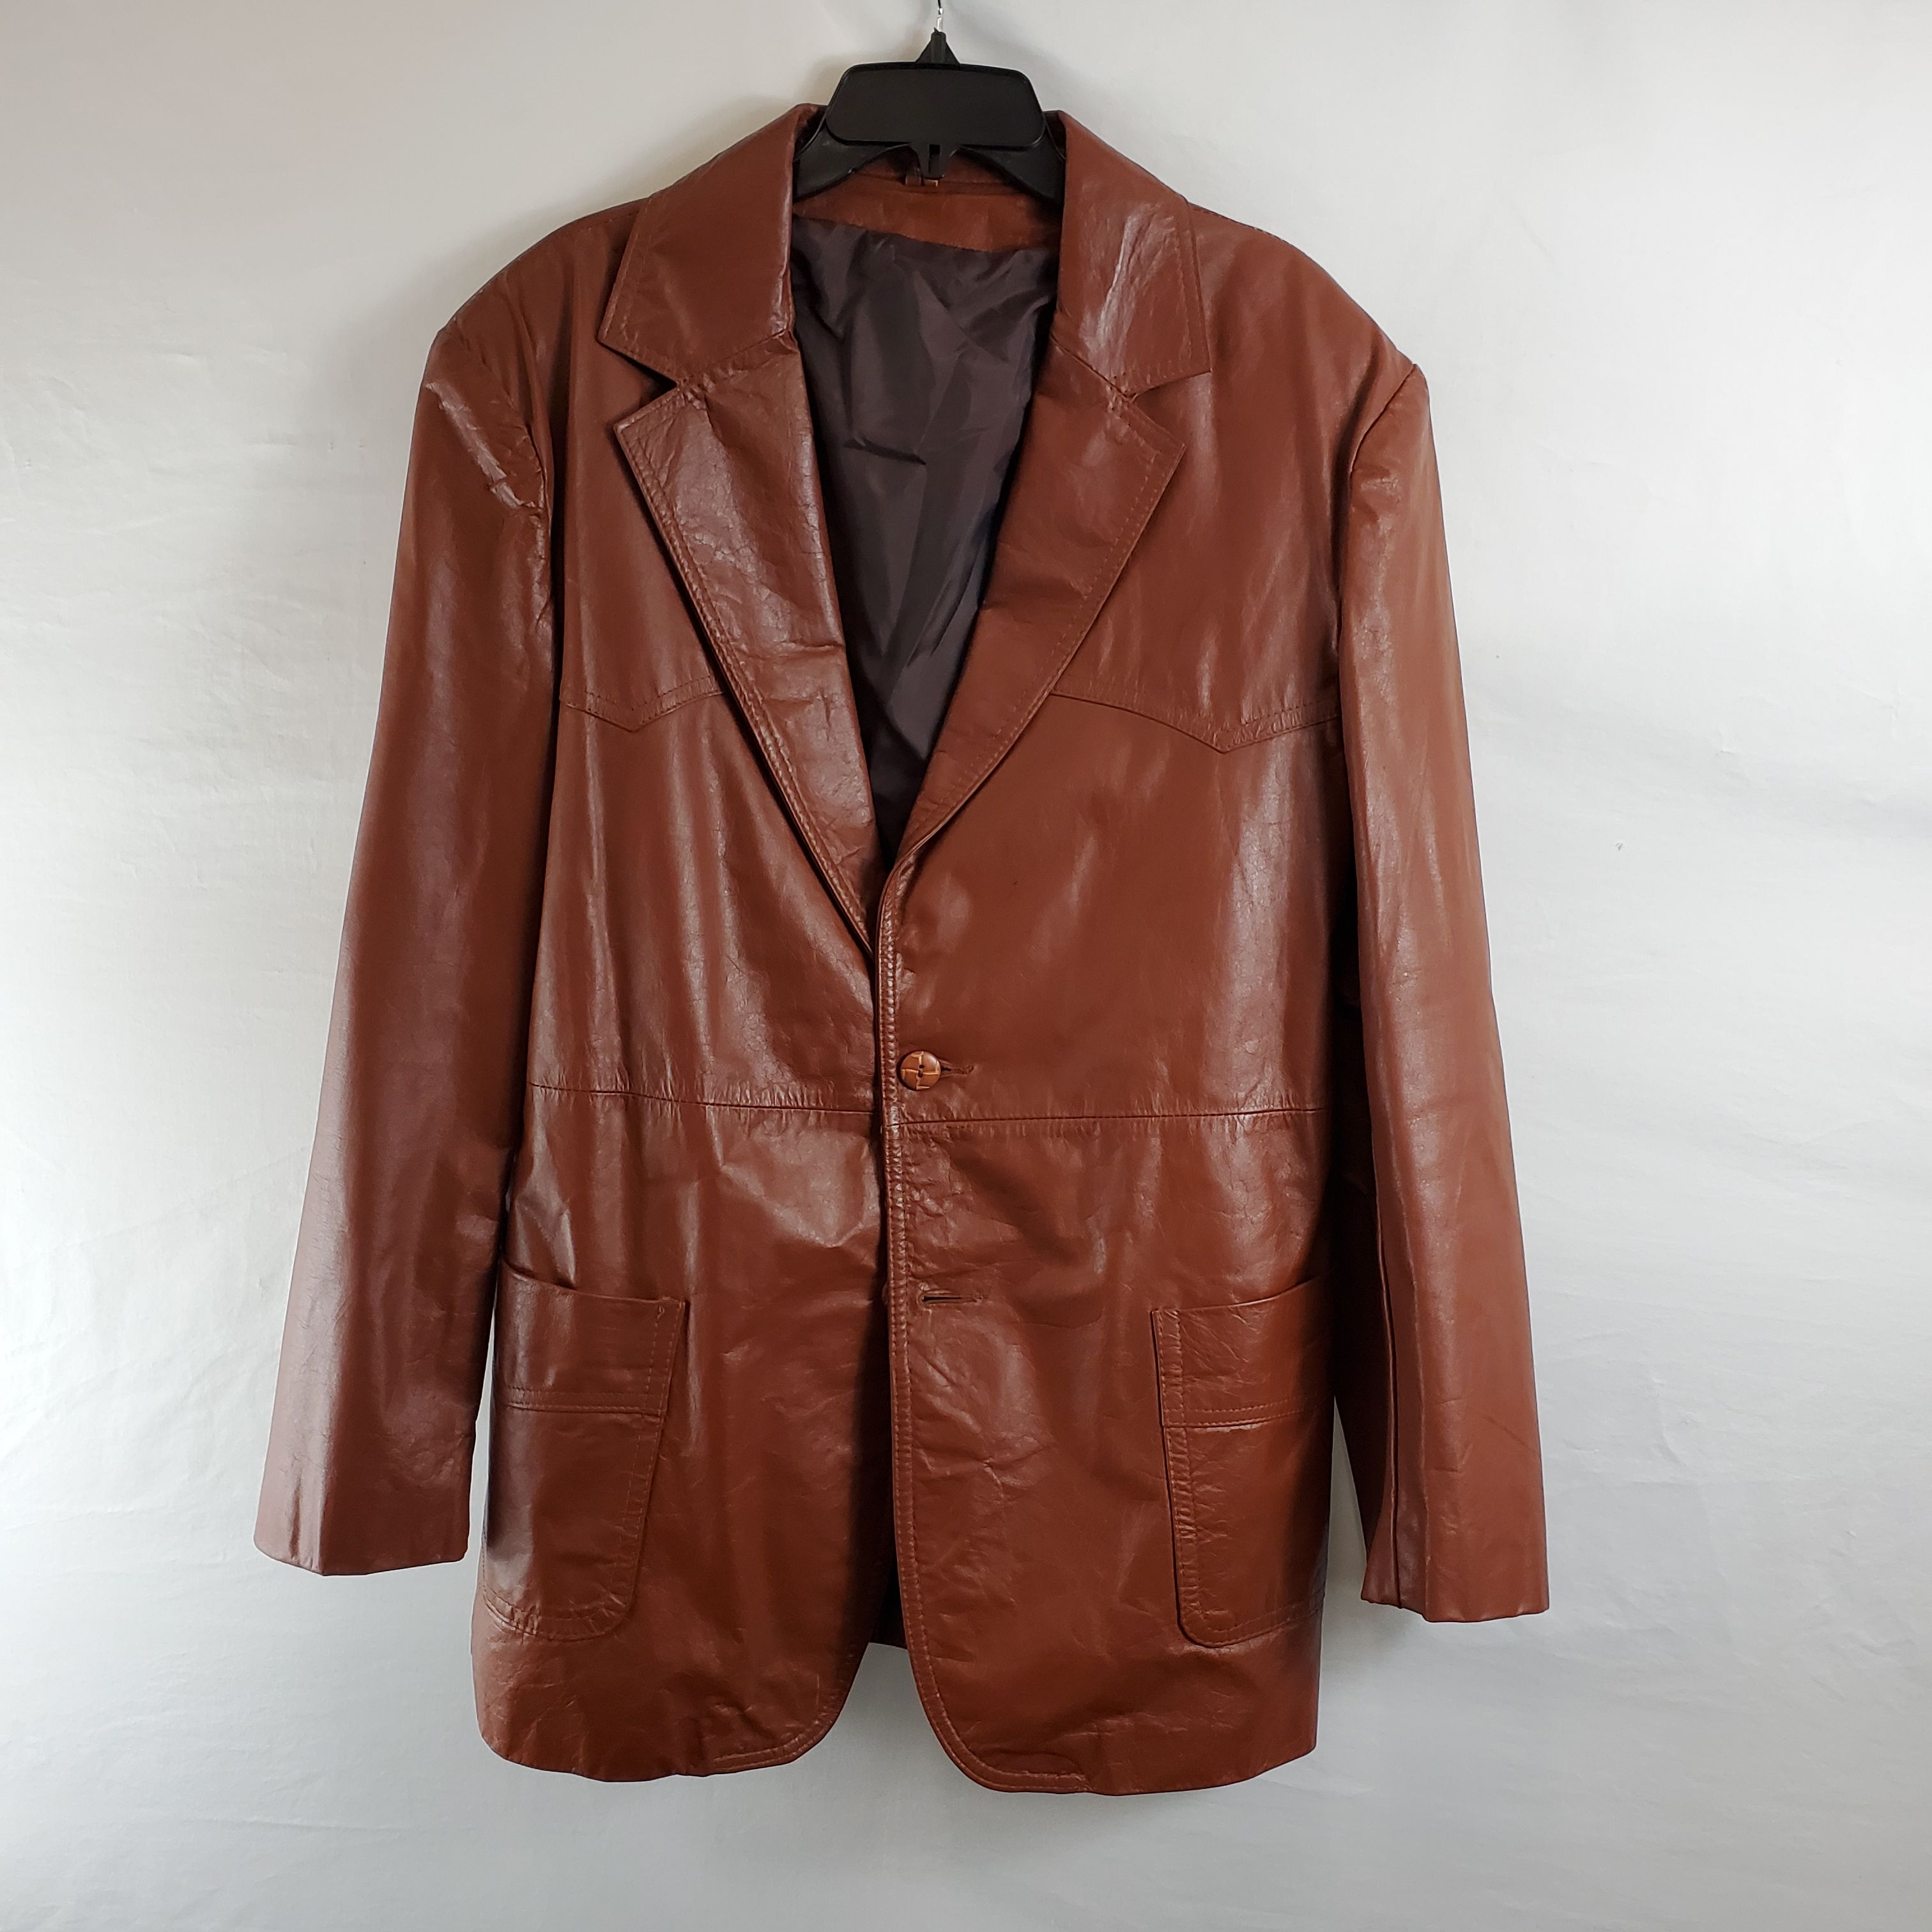 Buy Sears The Leather Shop Men Brown Jacket Sz 44 Long for USD 34.99 |  GoodwillFinds